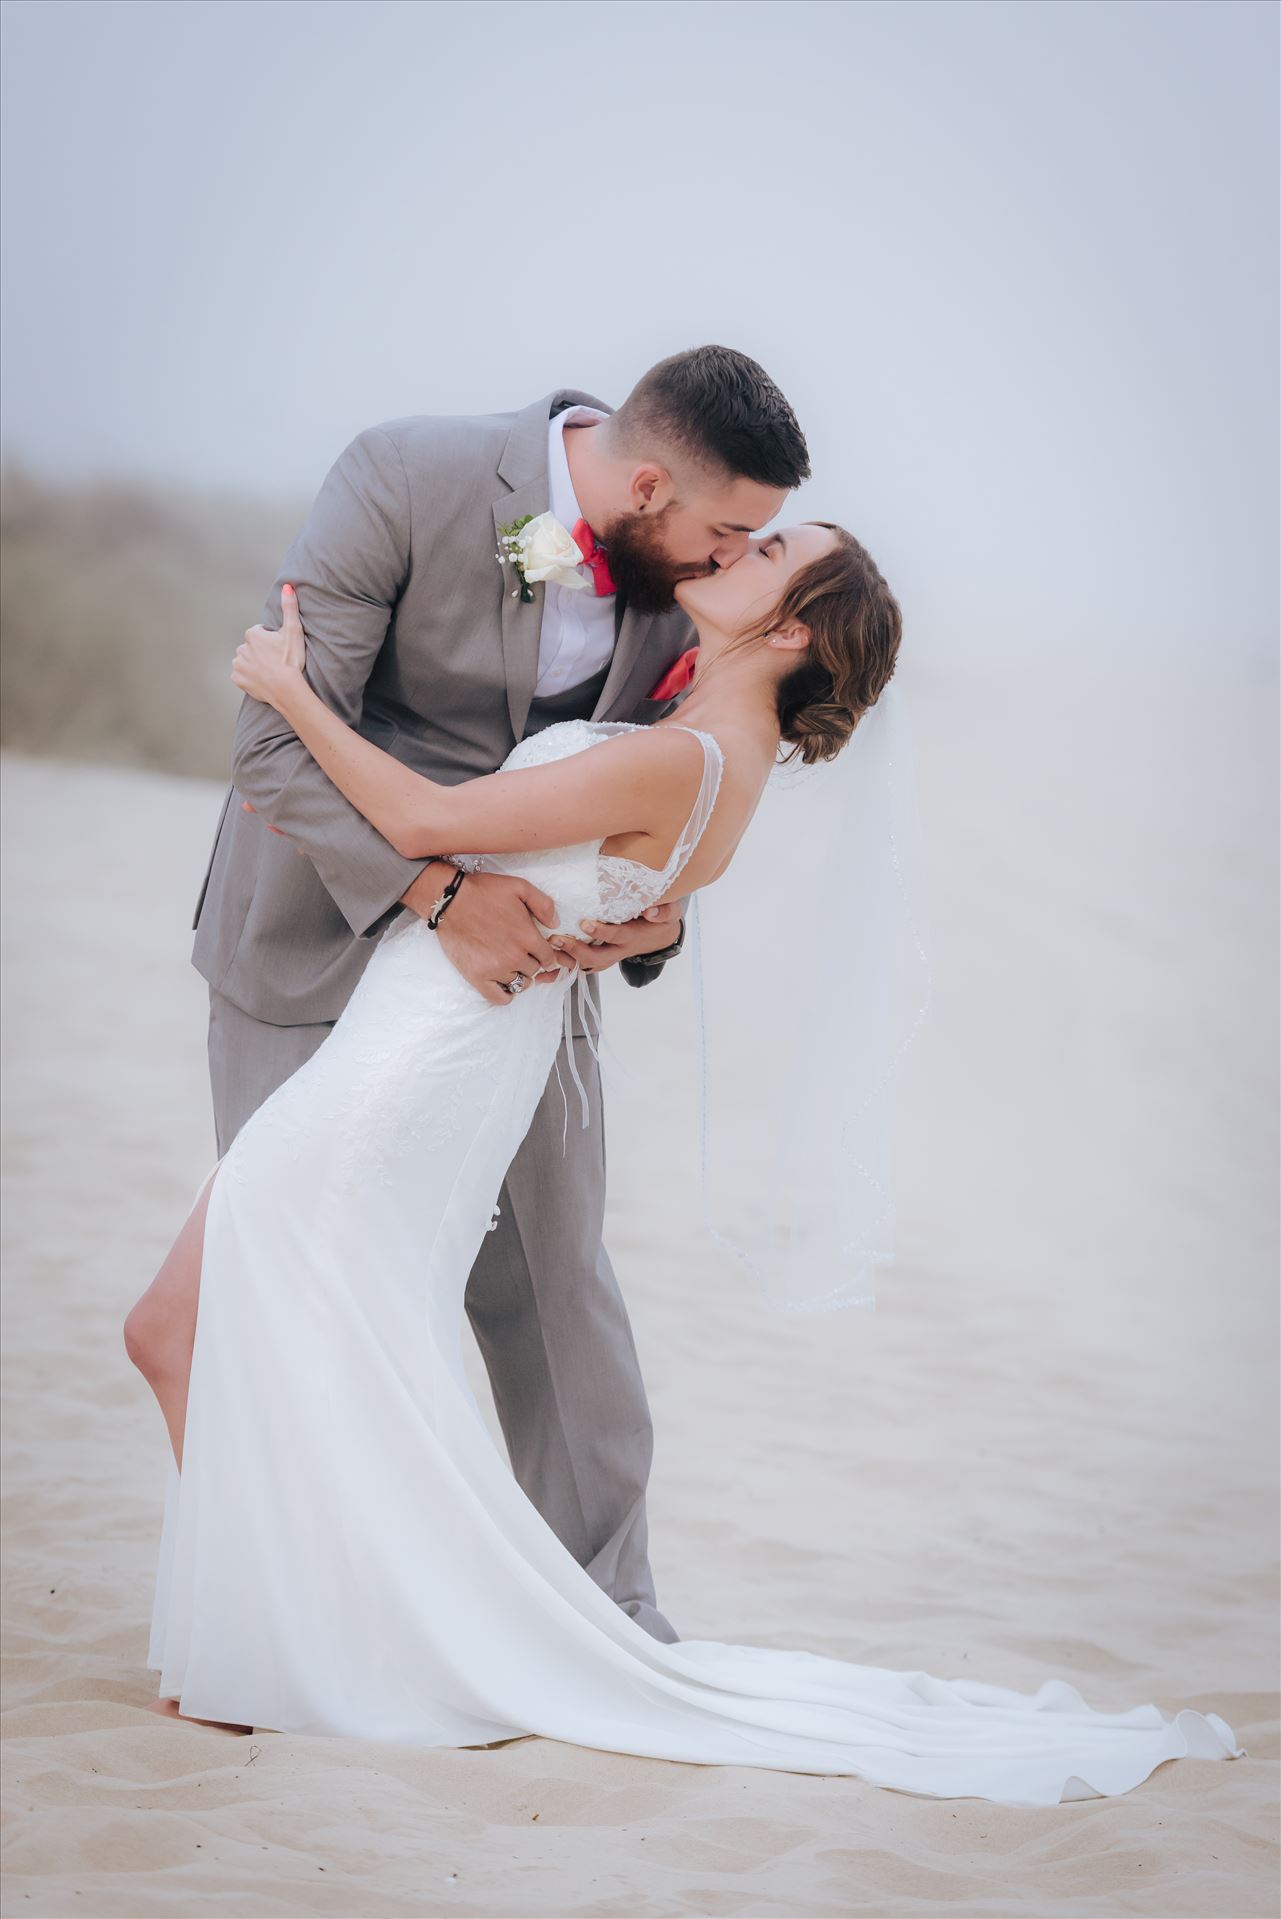 FW-8130.jpg Romantic wedding in the sand on Grover Beach in California.  Barefoot with surfboards and driftwood, tent and ceremony set up by Beach Butlerz, wedding photography by Mirror's Edge Photography.  Romantic Bride and Groom dip in the fog by Sarah Williams